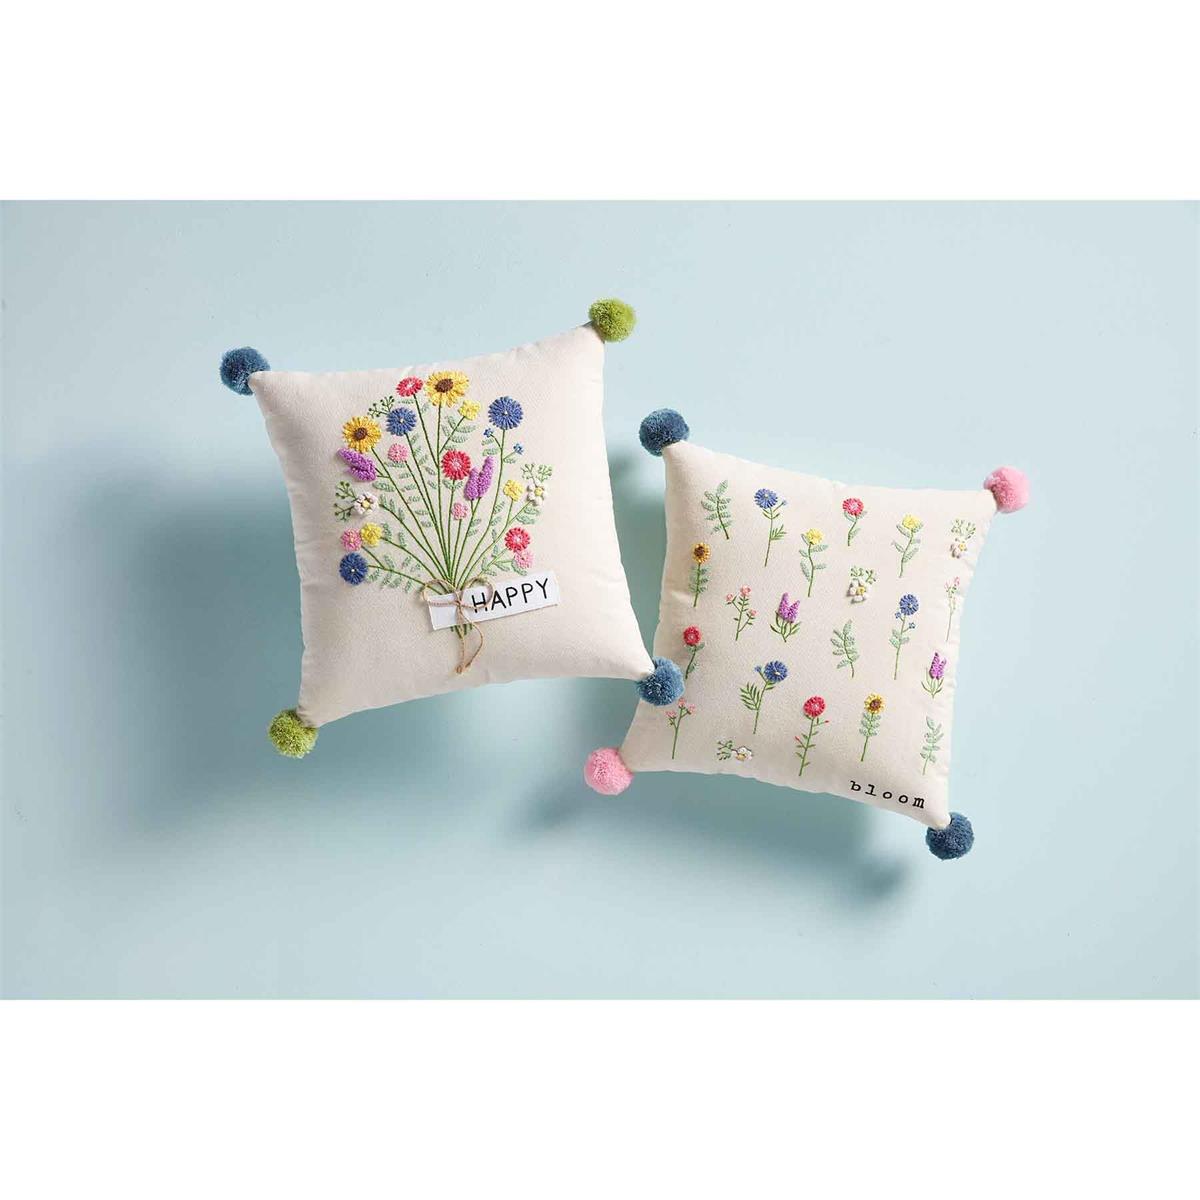 two floral embroidery pillows, one with happy and a spring floral bouquet and green and blue poms on the corners, the other has bloom and multiple colors of flowers scattered all over with pink and blue poms. both displayed against a light blue background